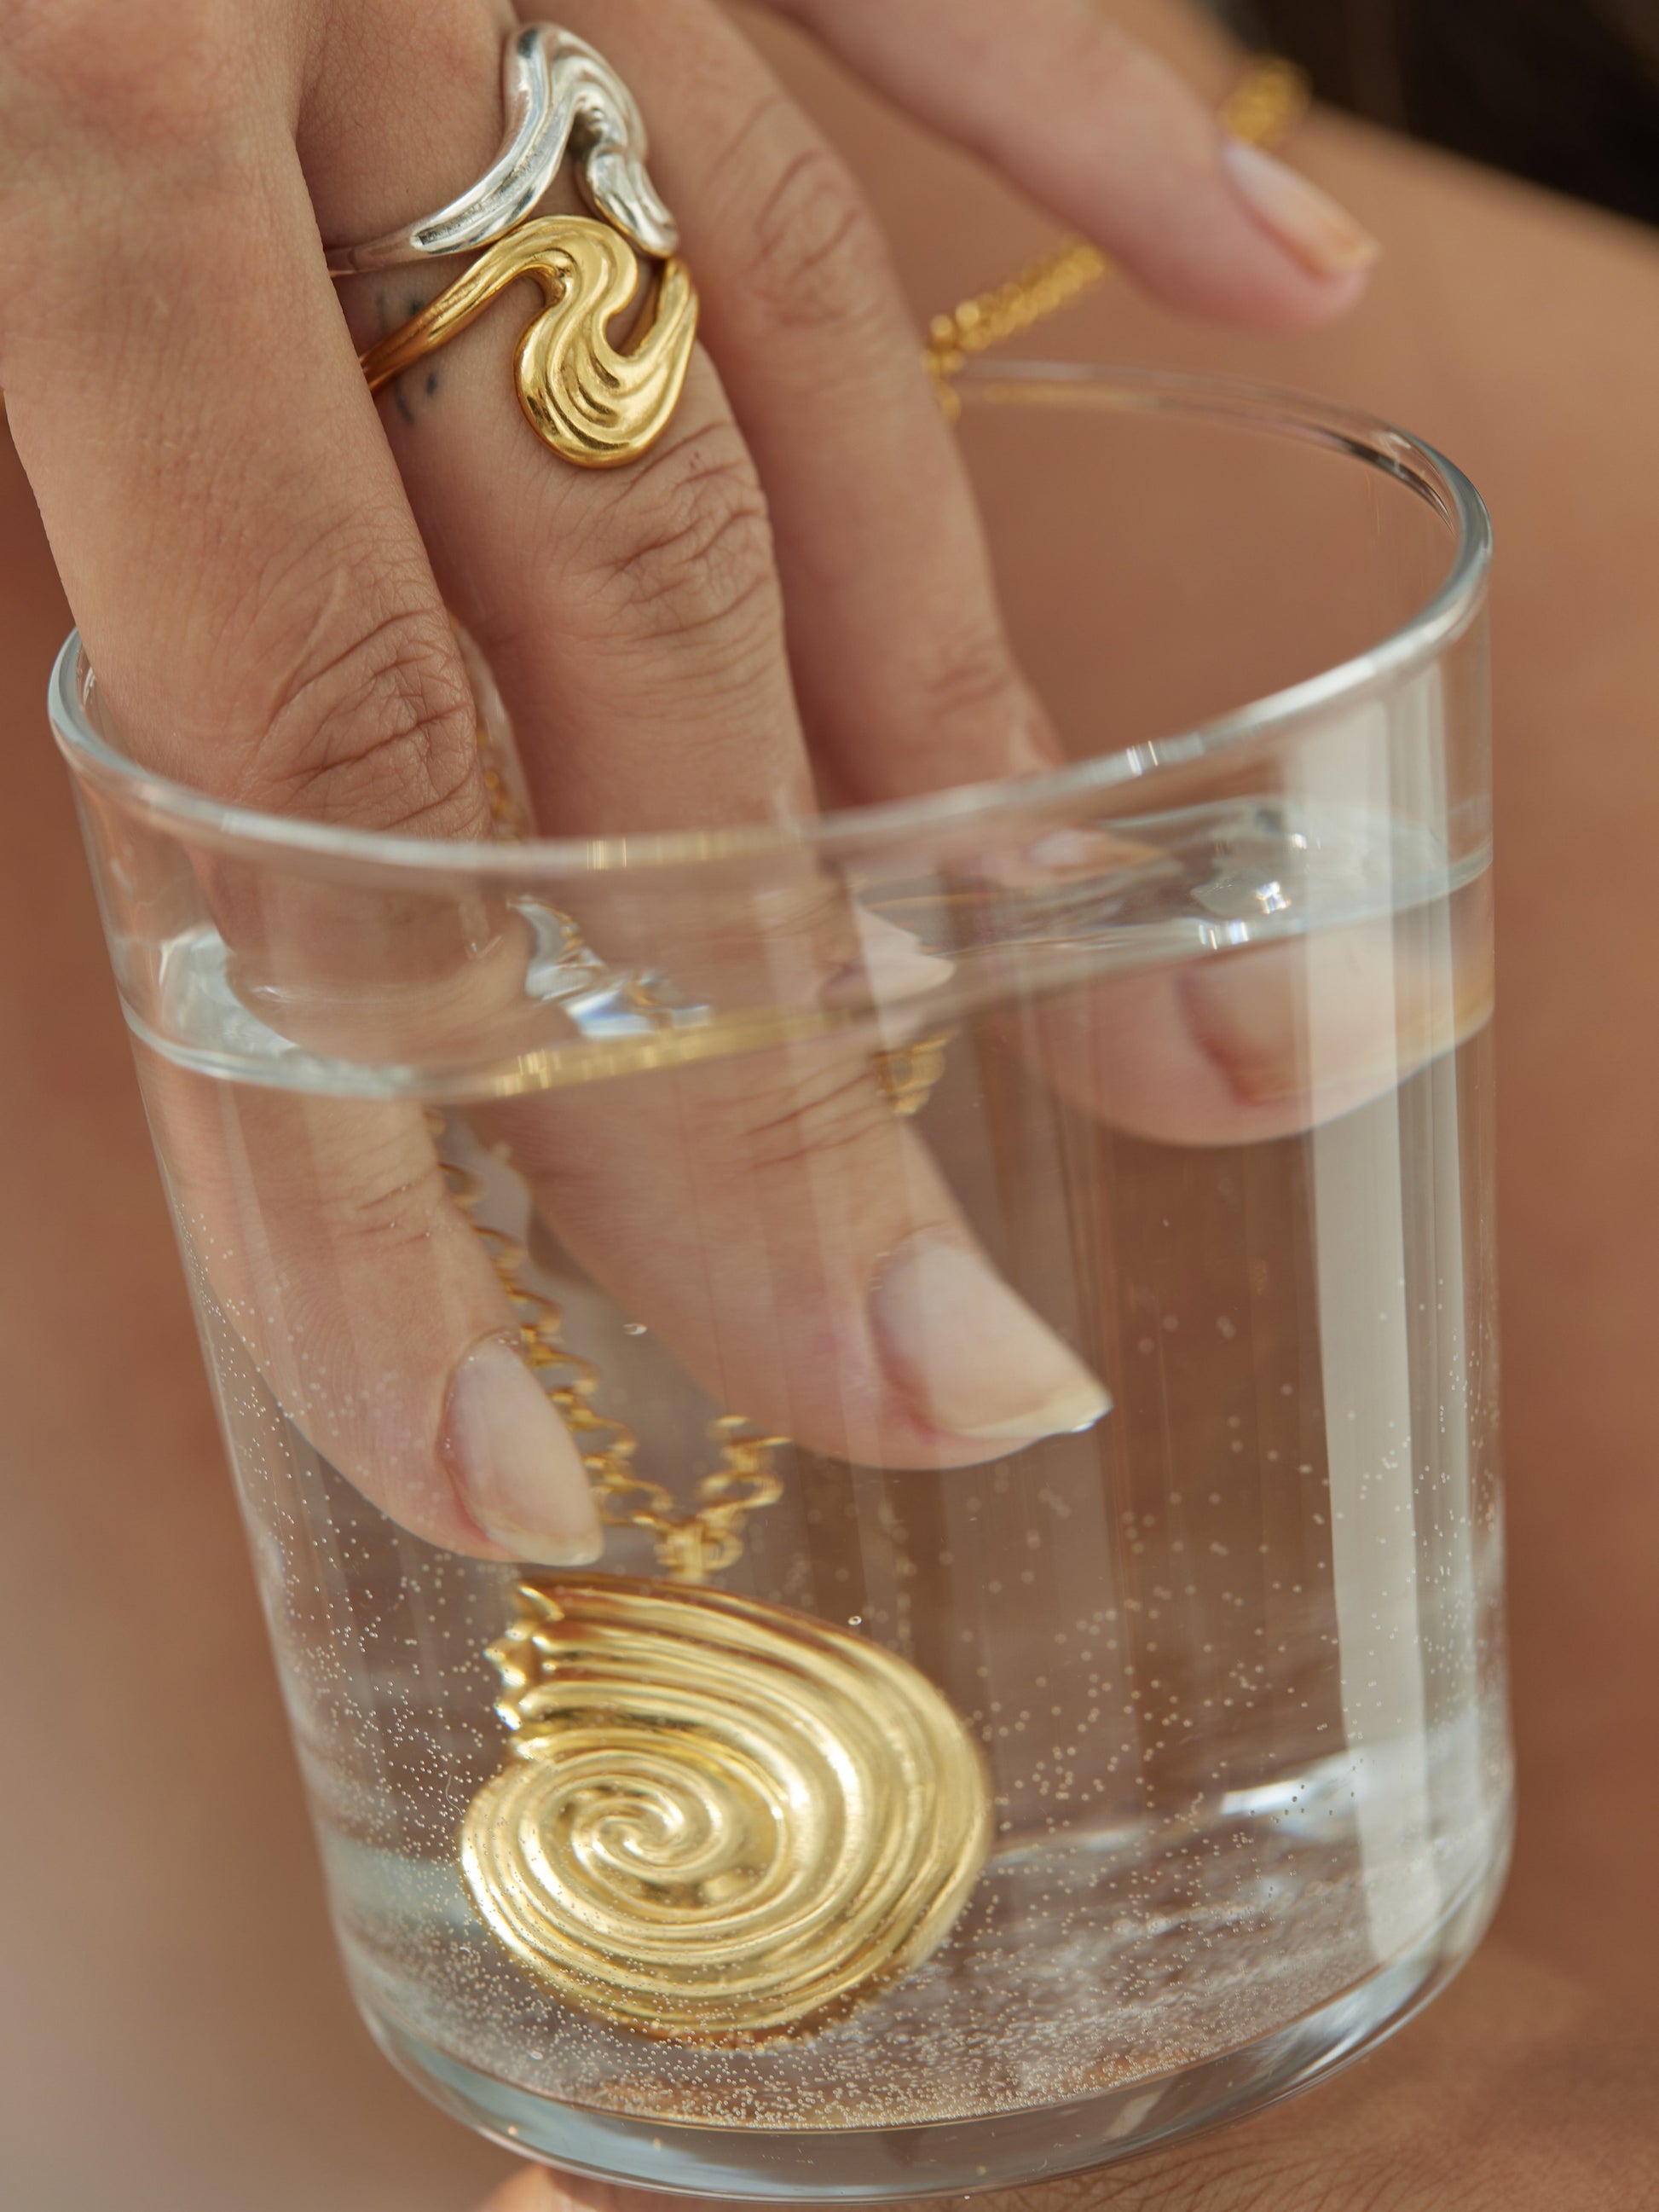 Hand in a glass of water, wearing gold jewelry